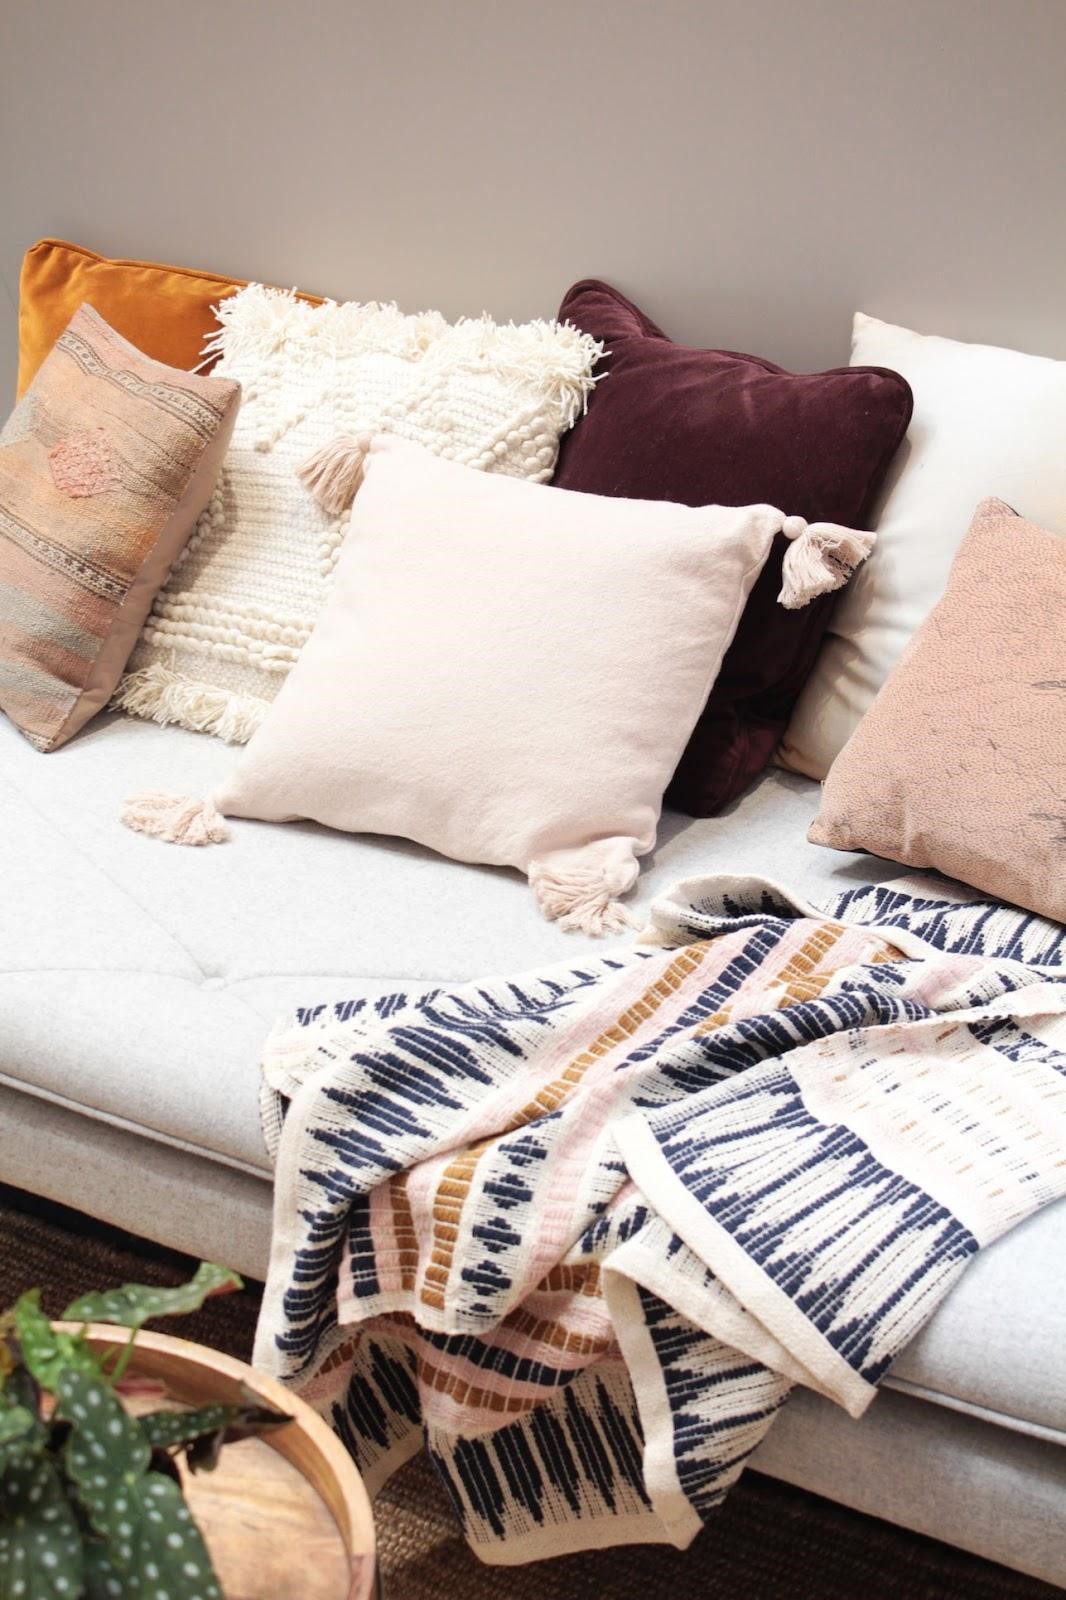 Get Creative with Custom Pillows for Your Home